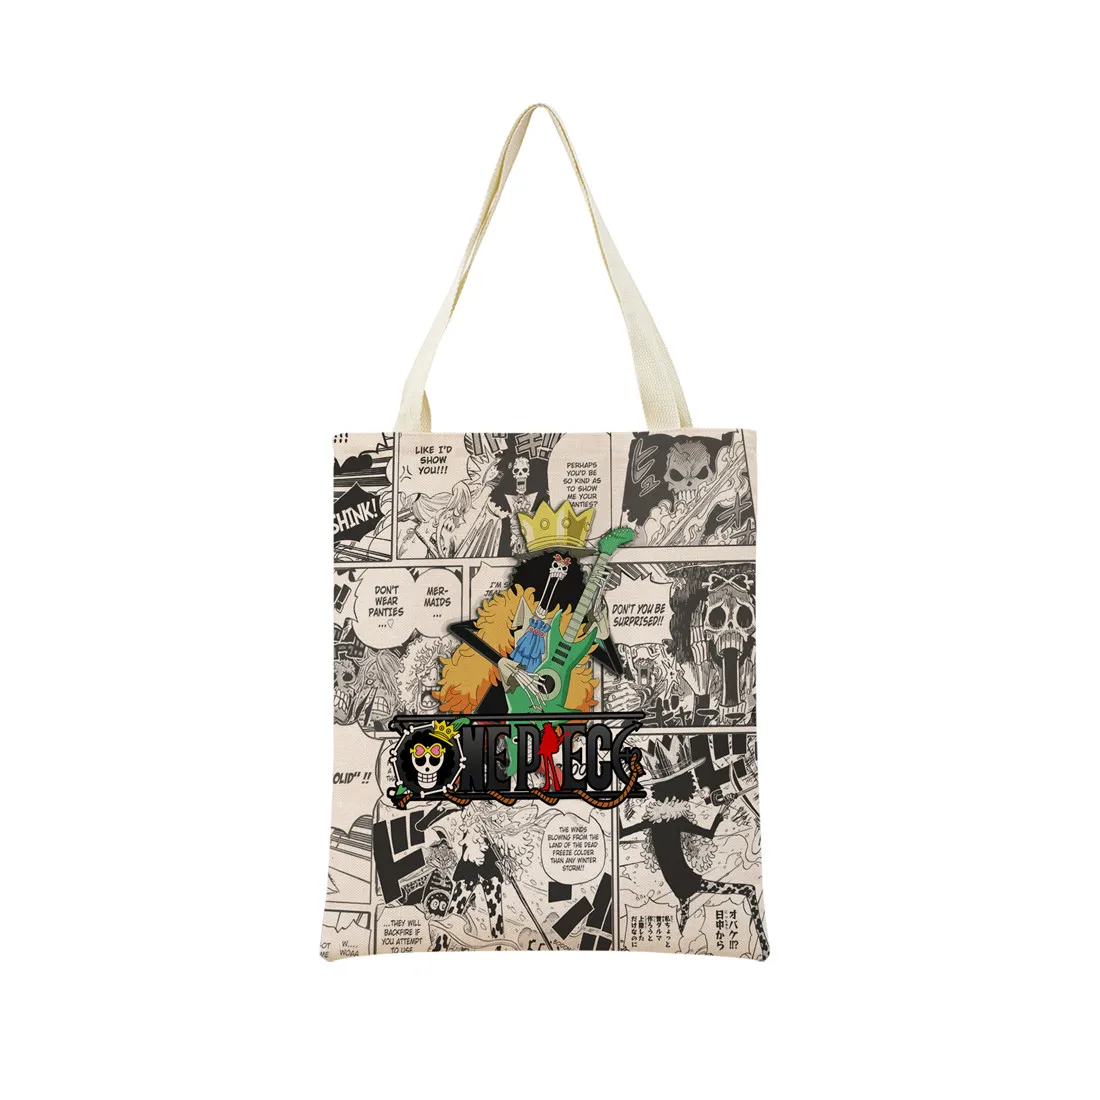 Brook One Piece Art Print Tote Bag - One Piece Store